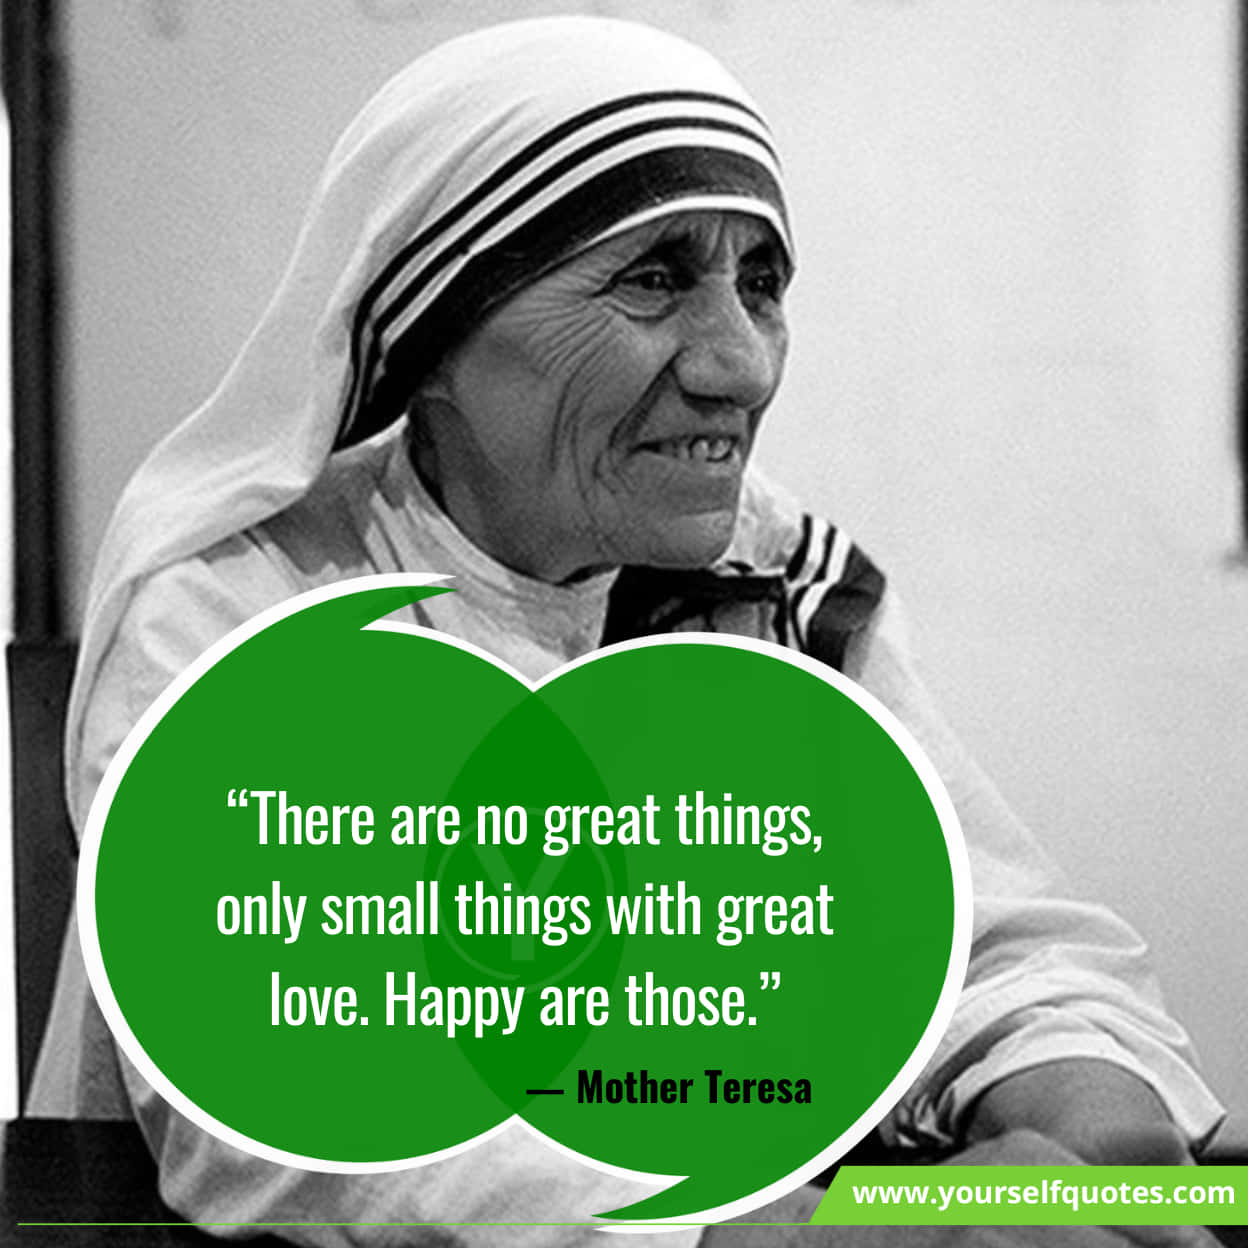 Heart-Warming Mother Teresa Quotes About Love